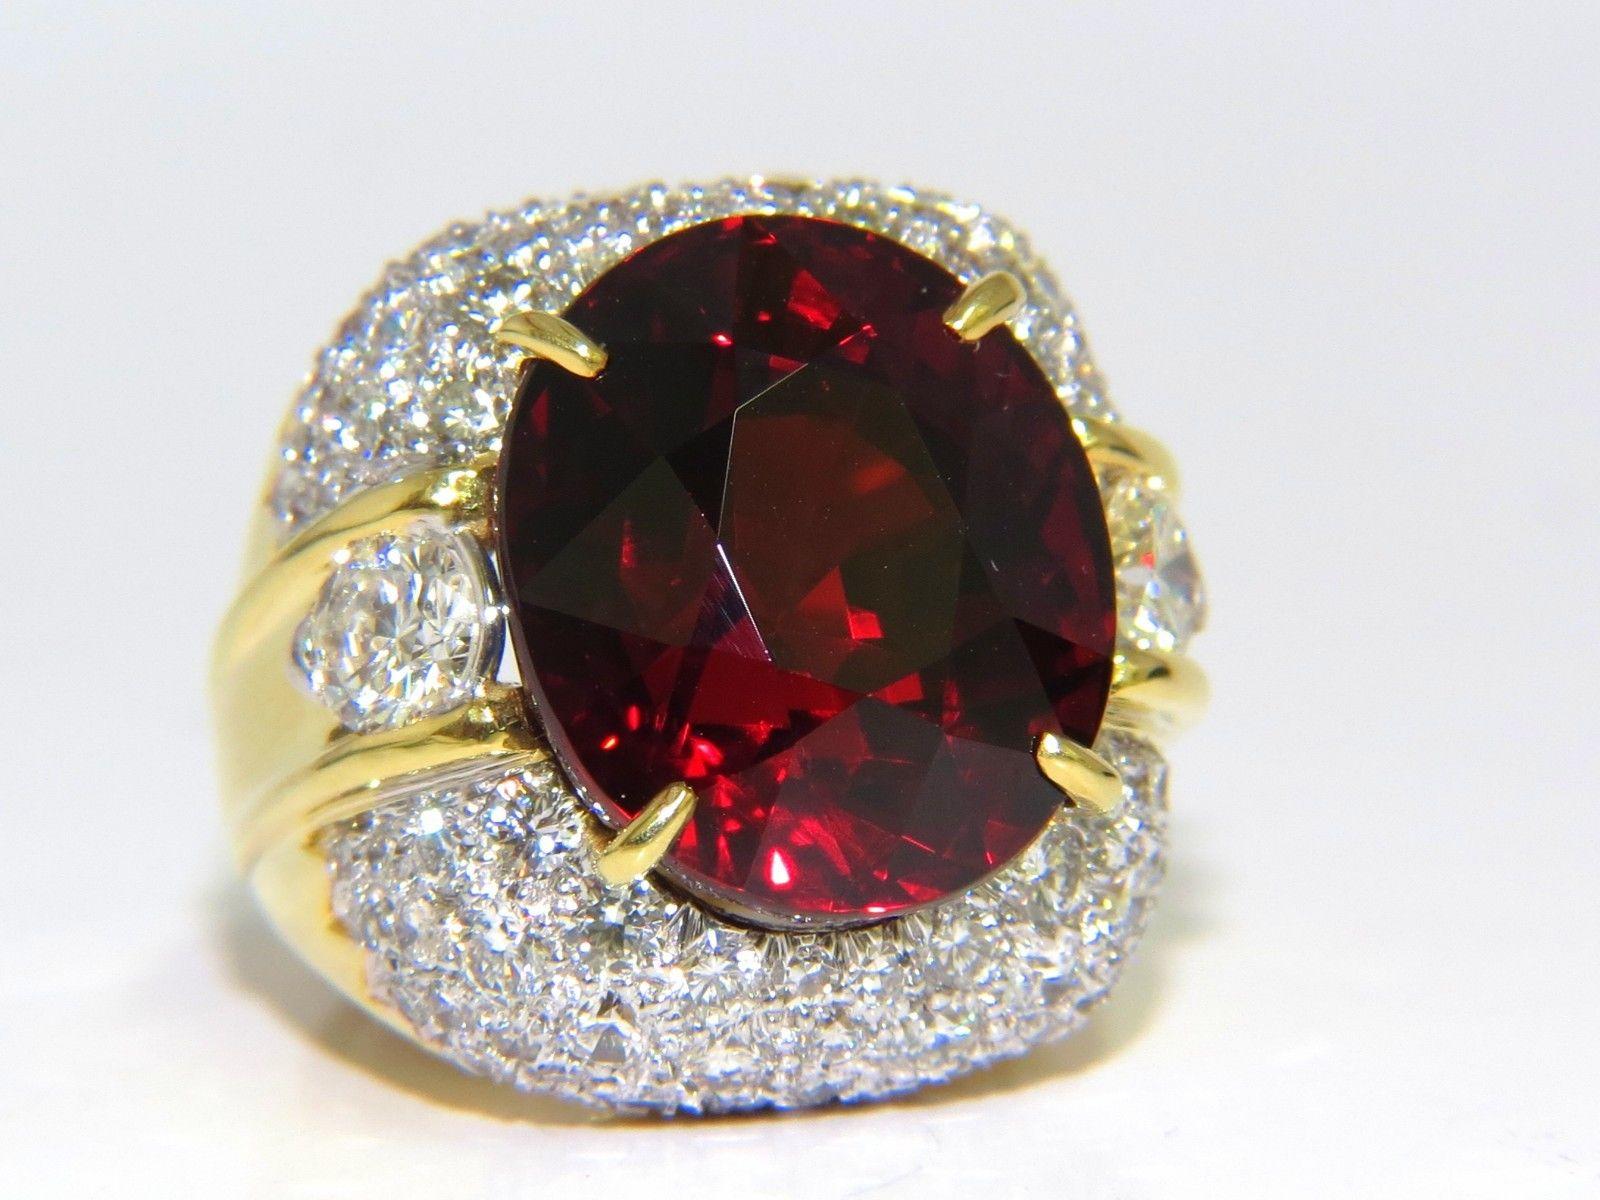 32.64ct GIA Natural Red Spessartite Garnet Diamonds Raised Dome Ring 18KT For Sale 4